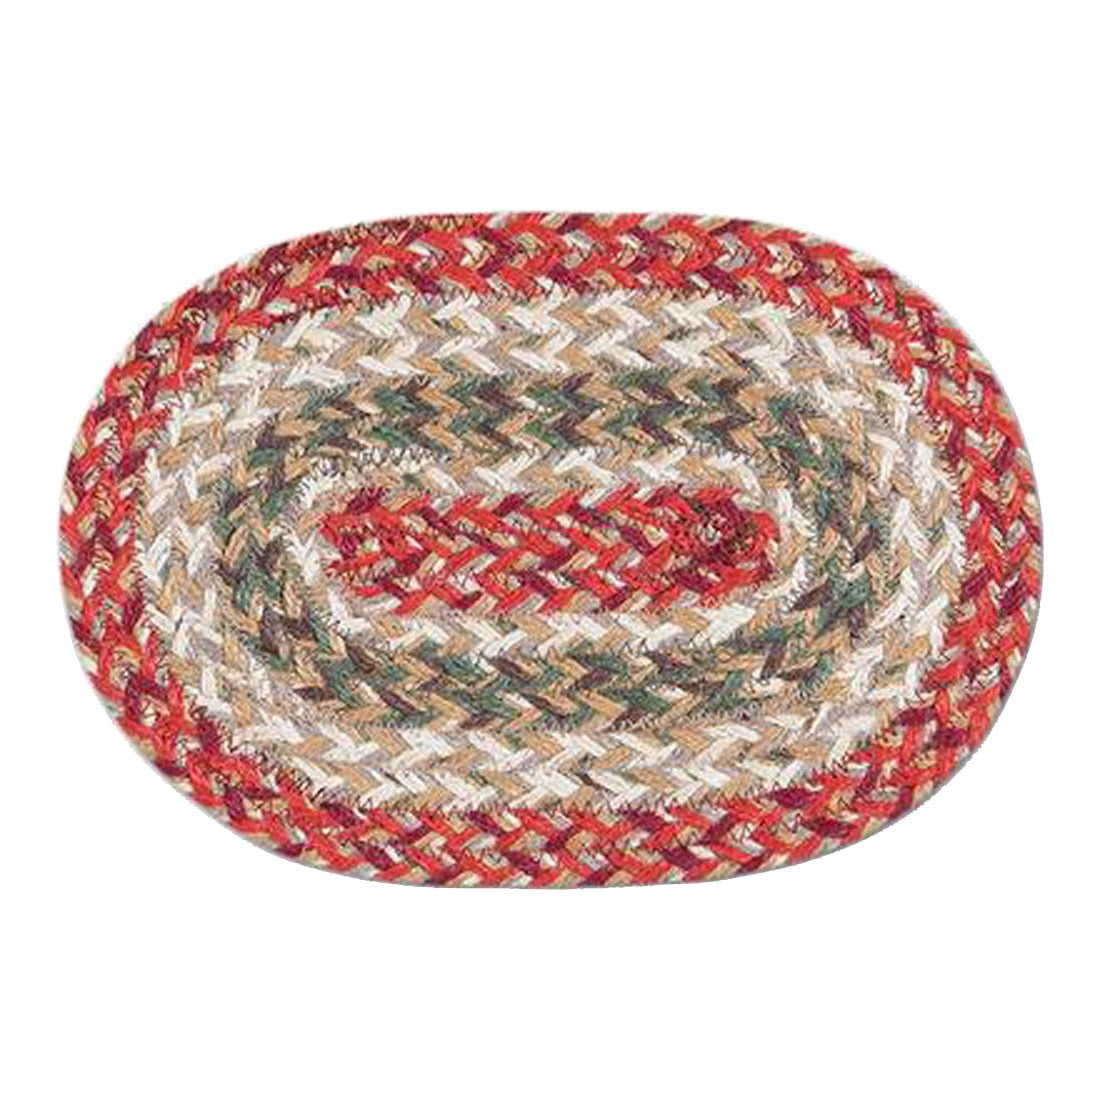 Capitol Importing 01-924 Olive Miniature Swatch Oval Rug, 7.5 X 11 In.